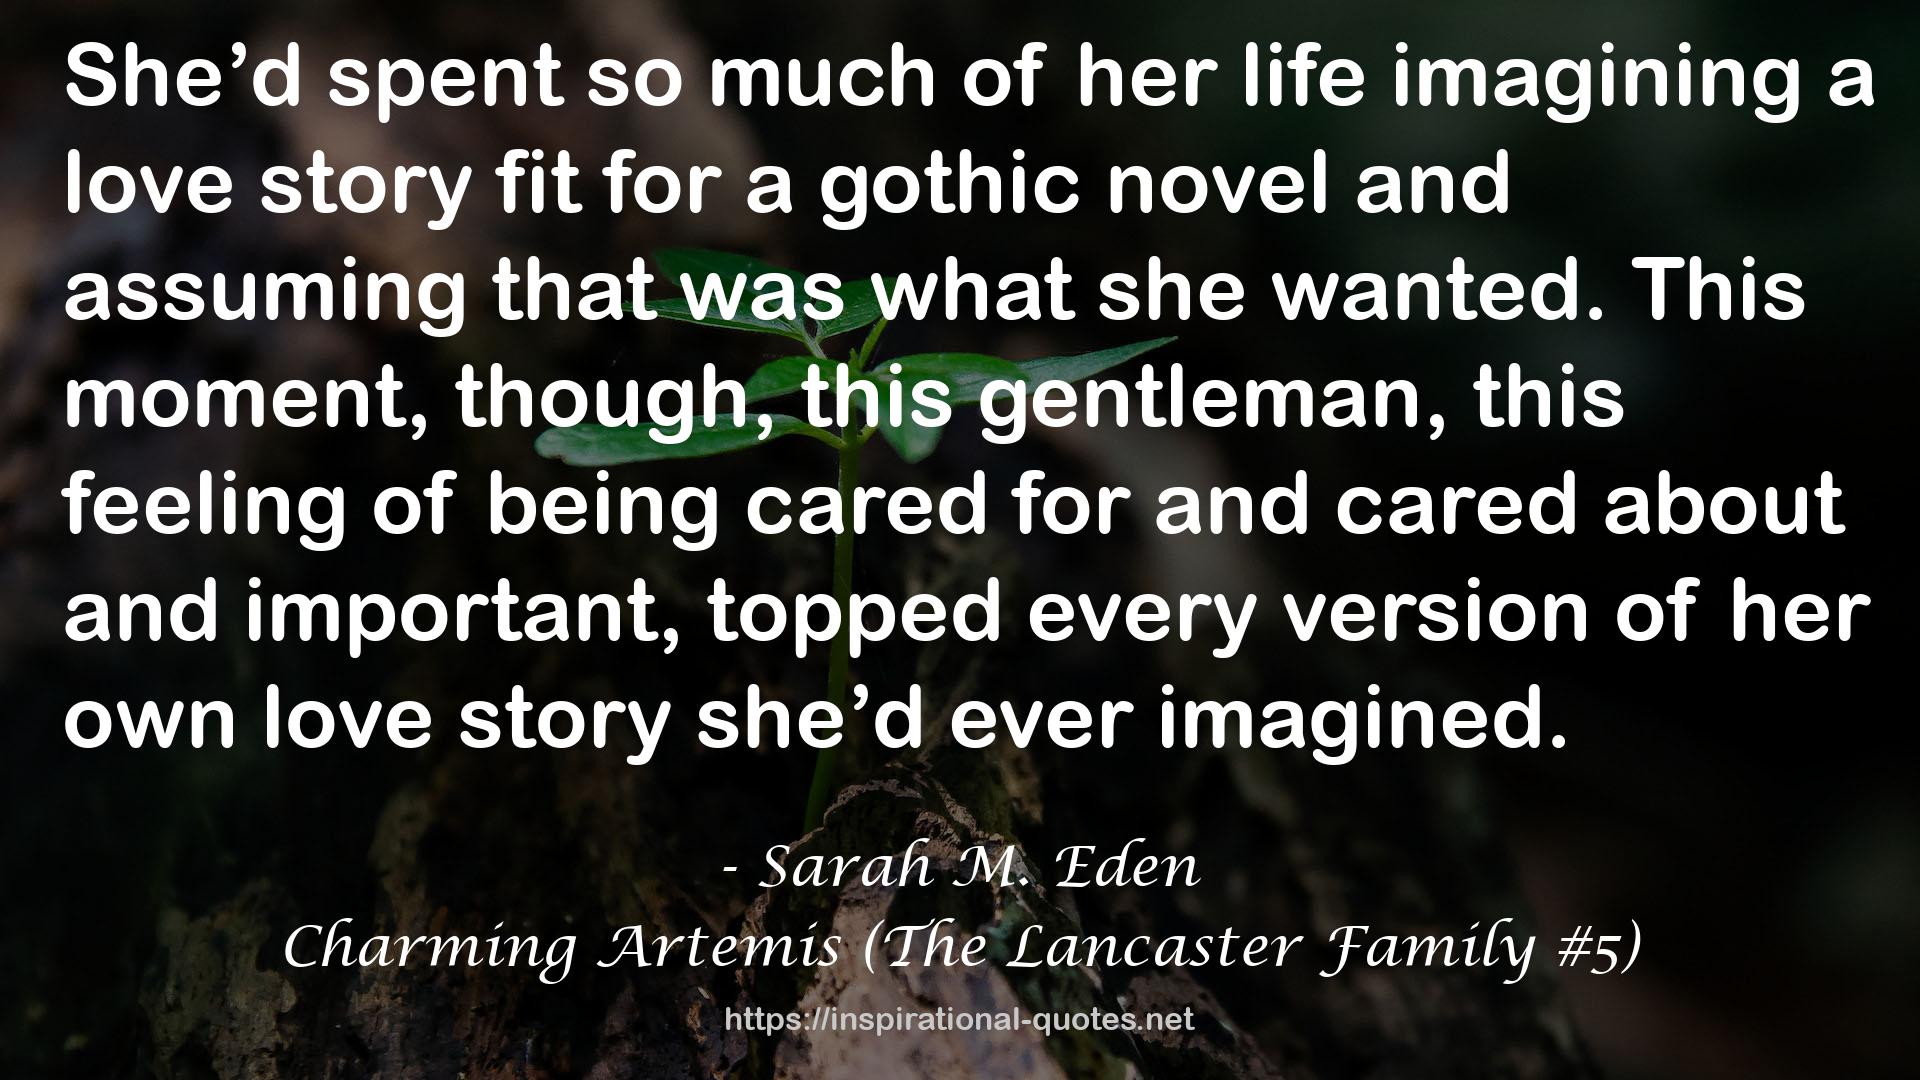 Charming Artemis (The Lancaster Family #5) QUOTES